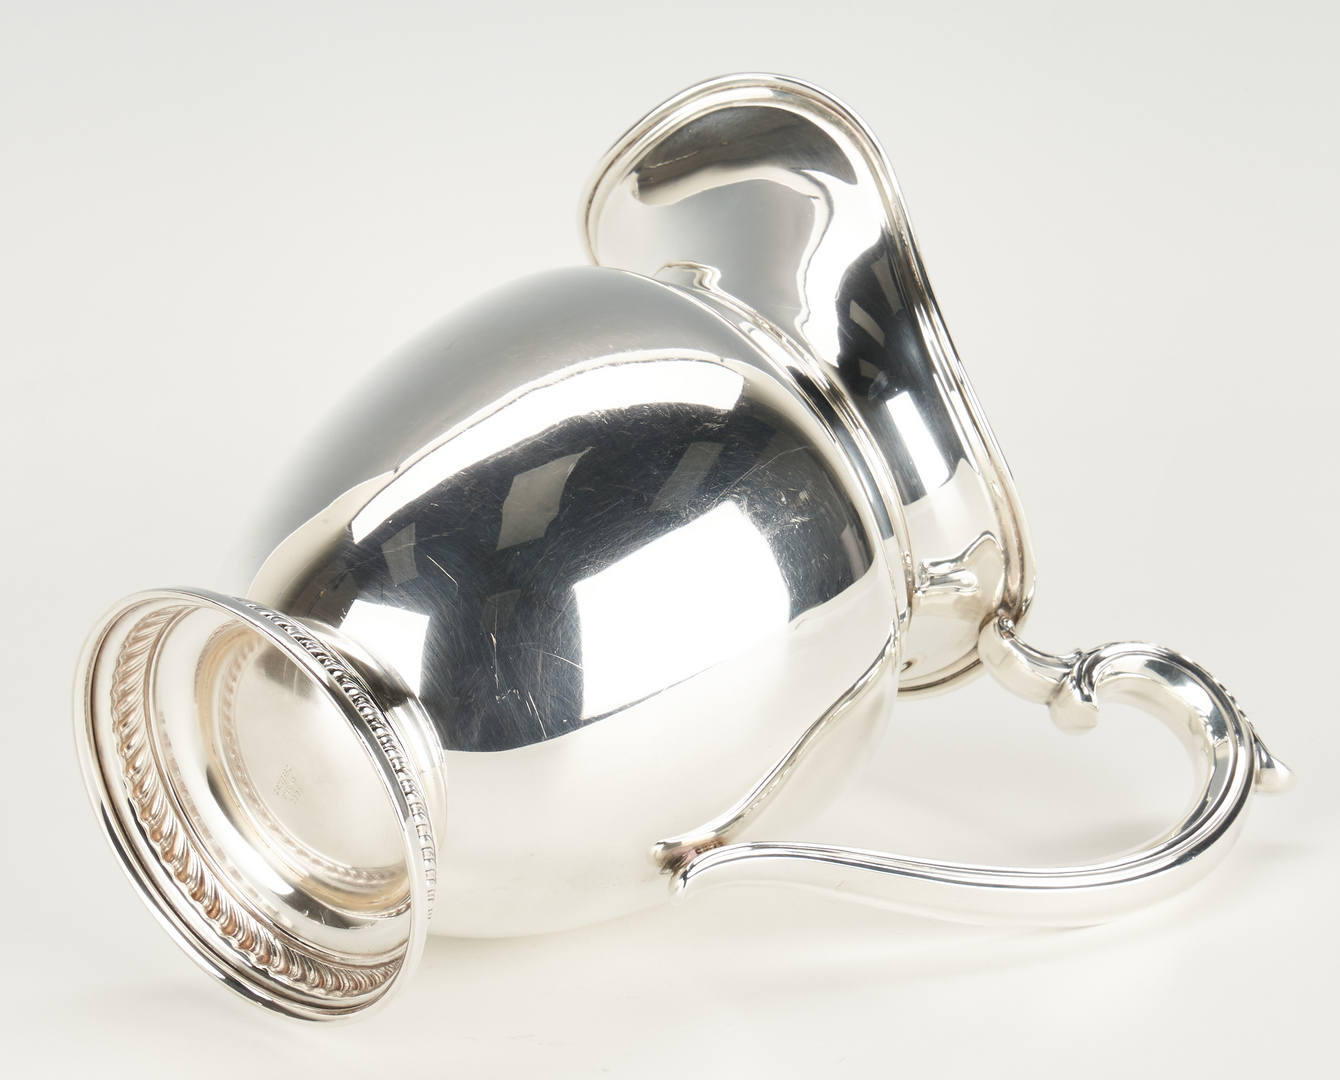 Lot 290: Wm. Rogers Sterling Silver Water Pitcher